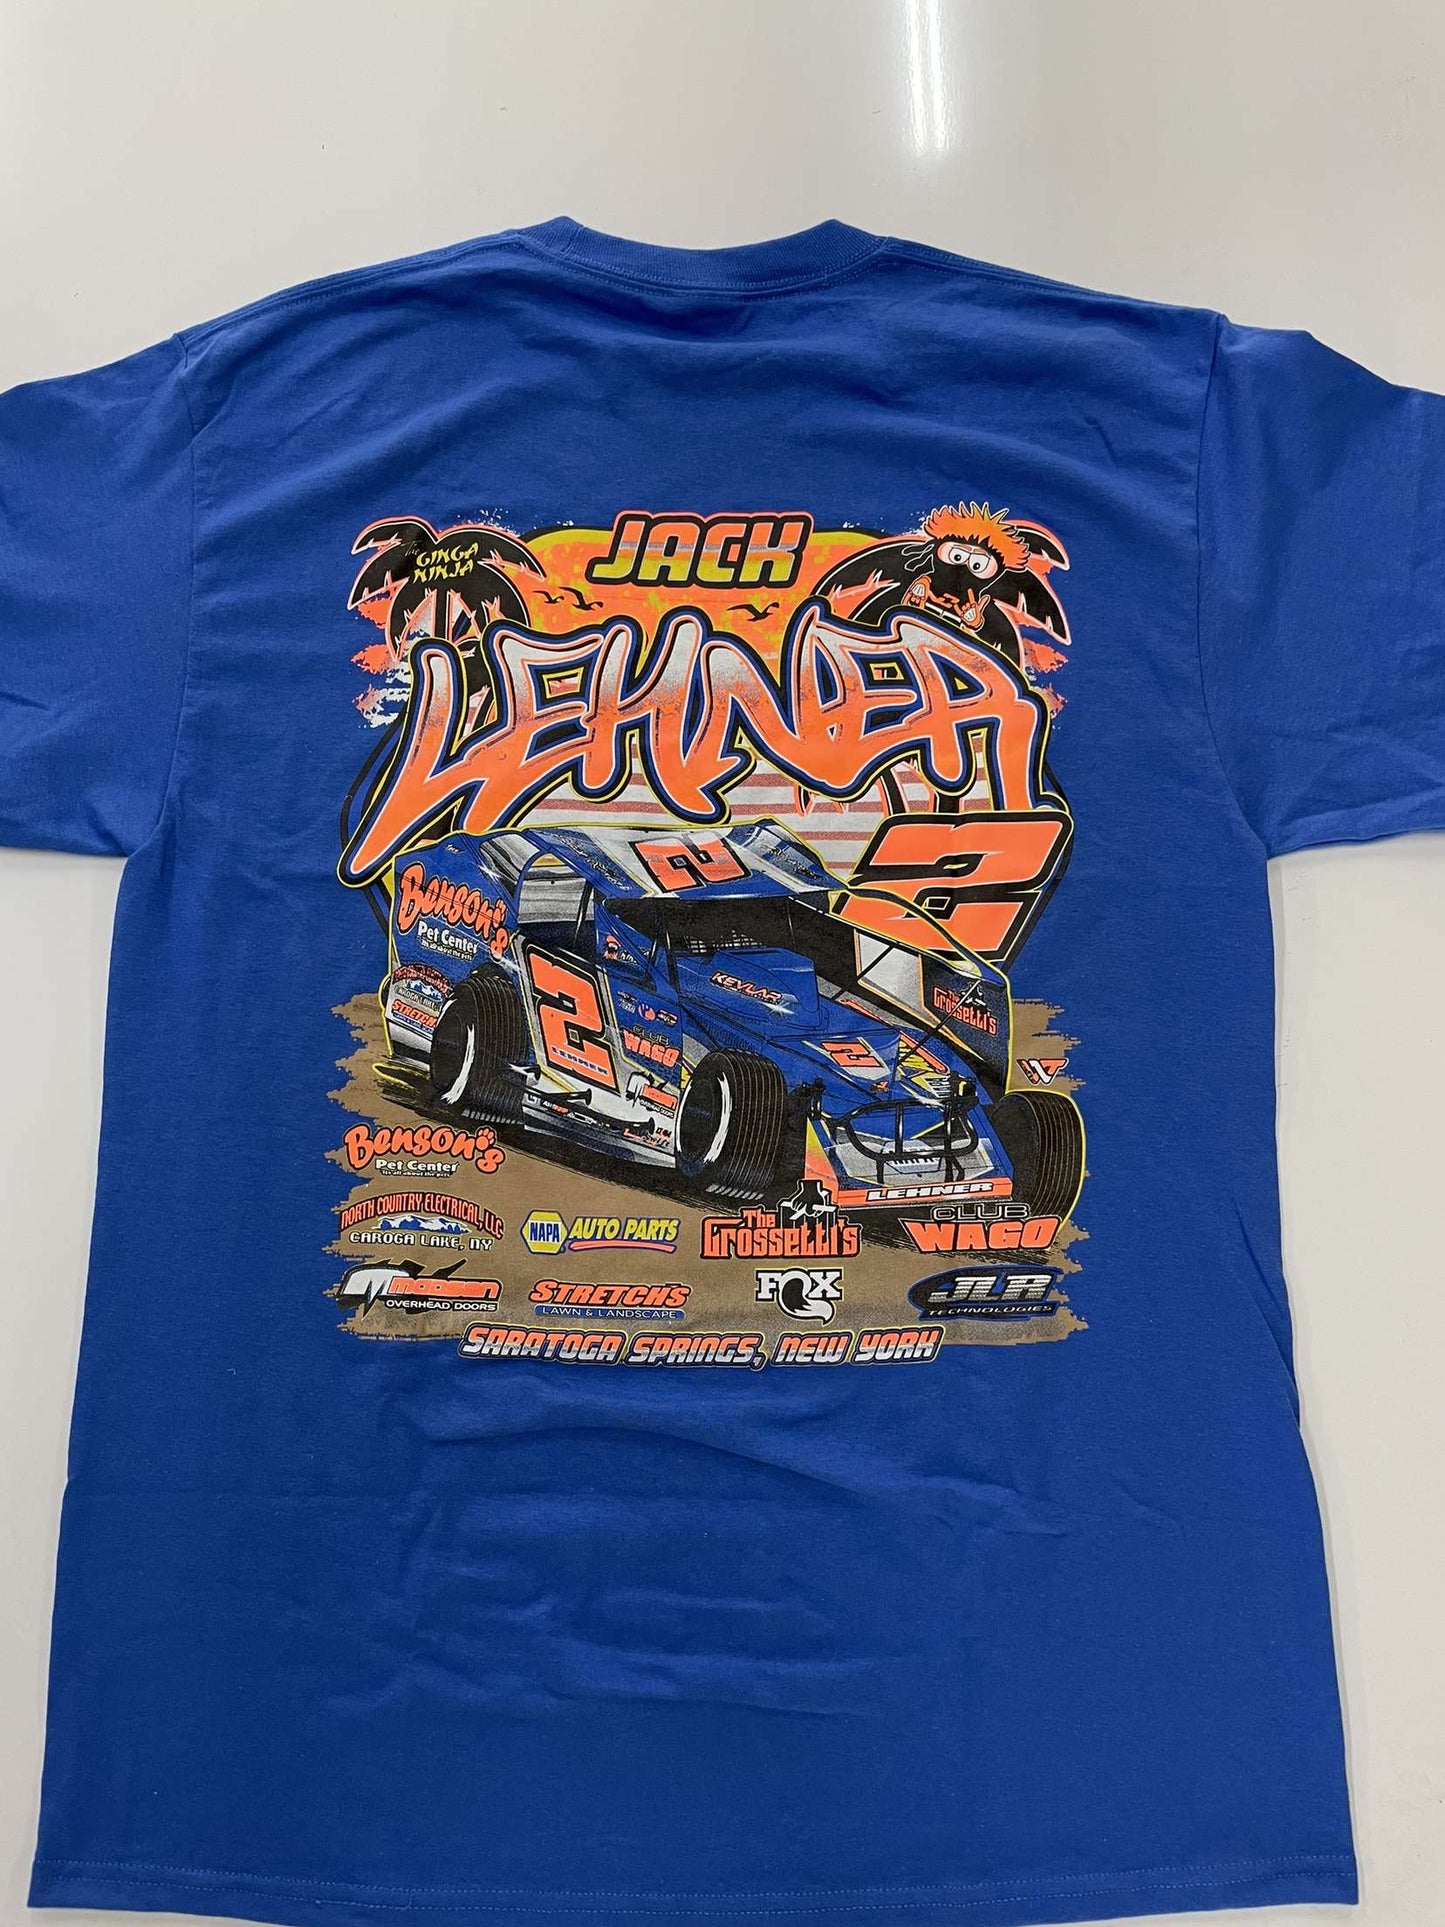 2023 Blue Graphic Tee